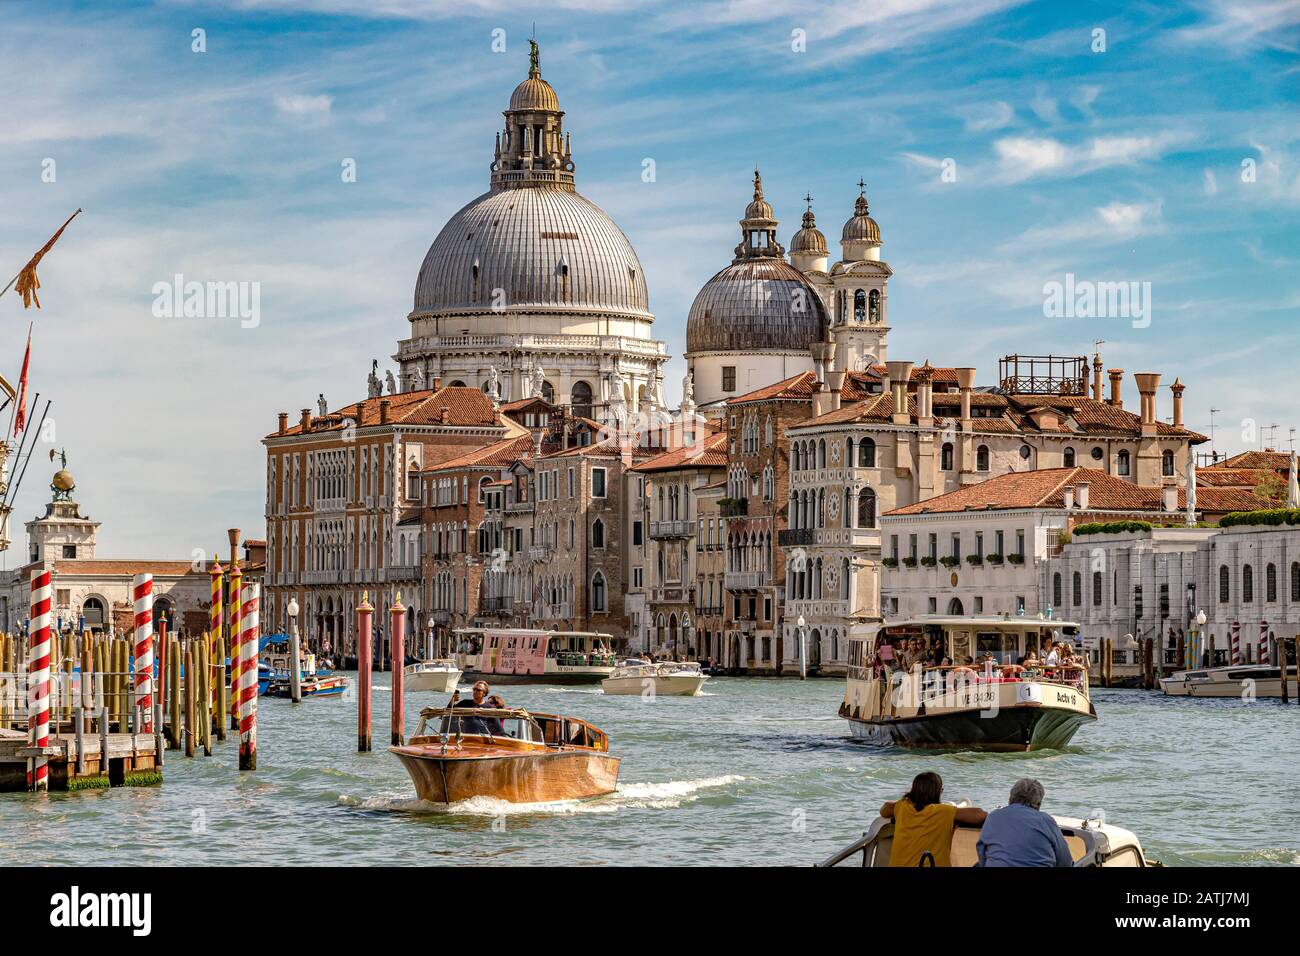 The Basilica di Santa Maria della SaluteI stands in a prominent position at the junction between the Grand Canal and the Bacino di San Marco ,Venice Stock Photo